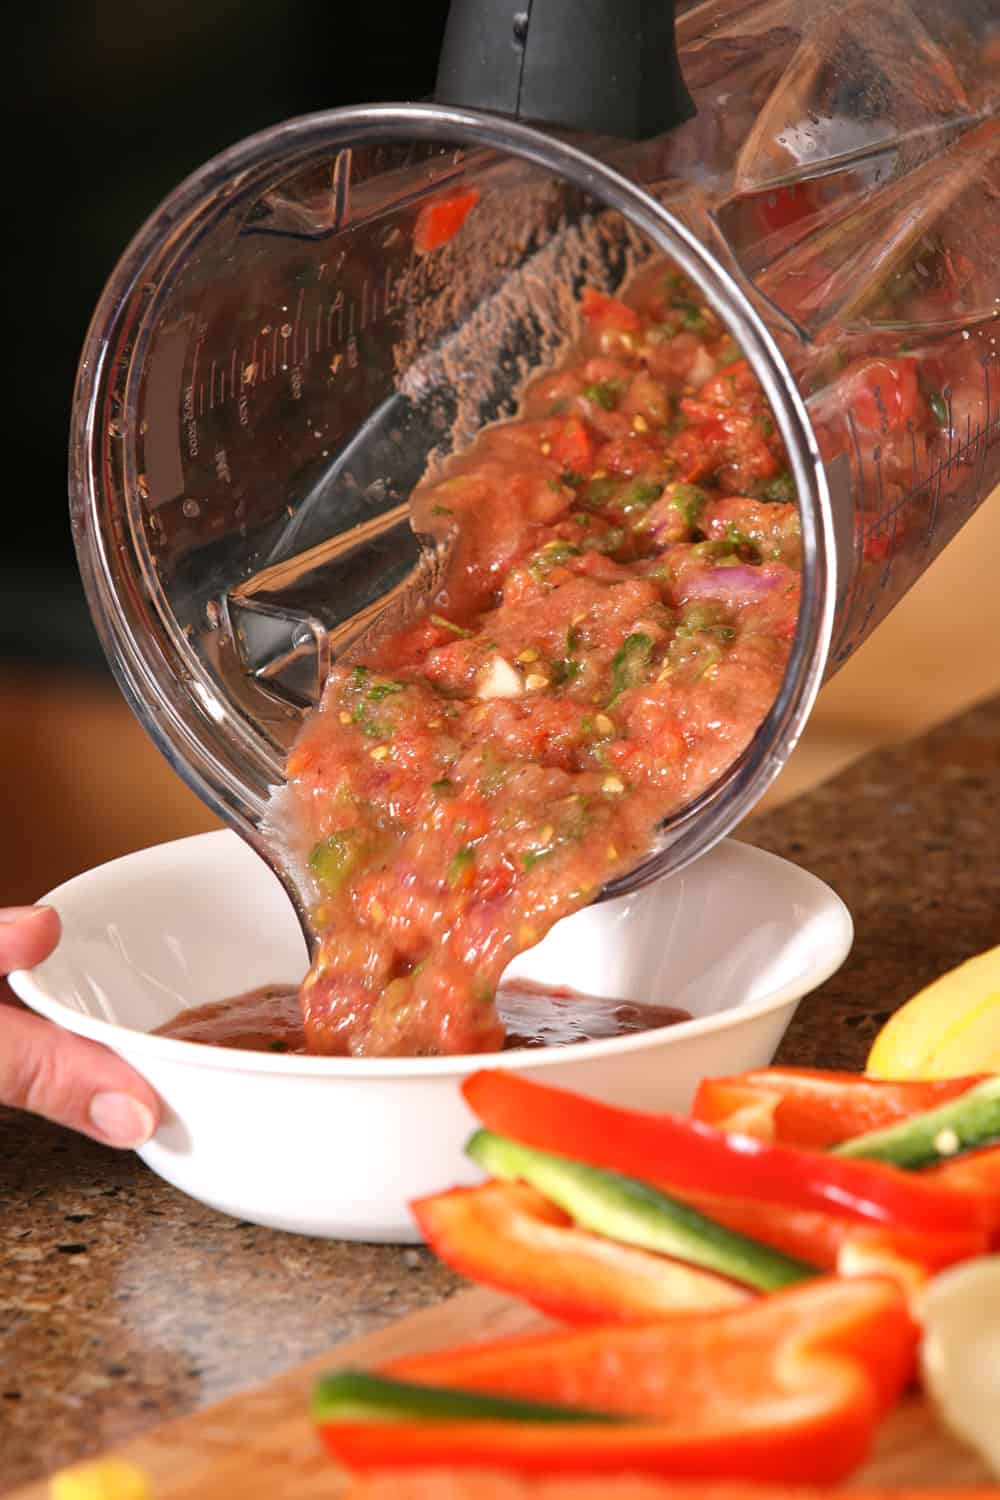 Salsa that was just made in a food processor is being poured into a bowl for serving.